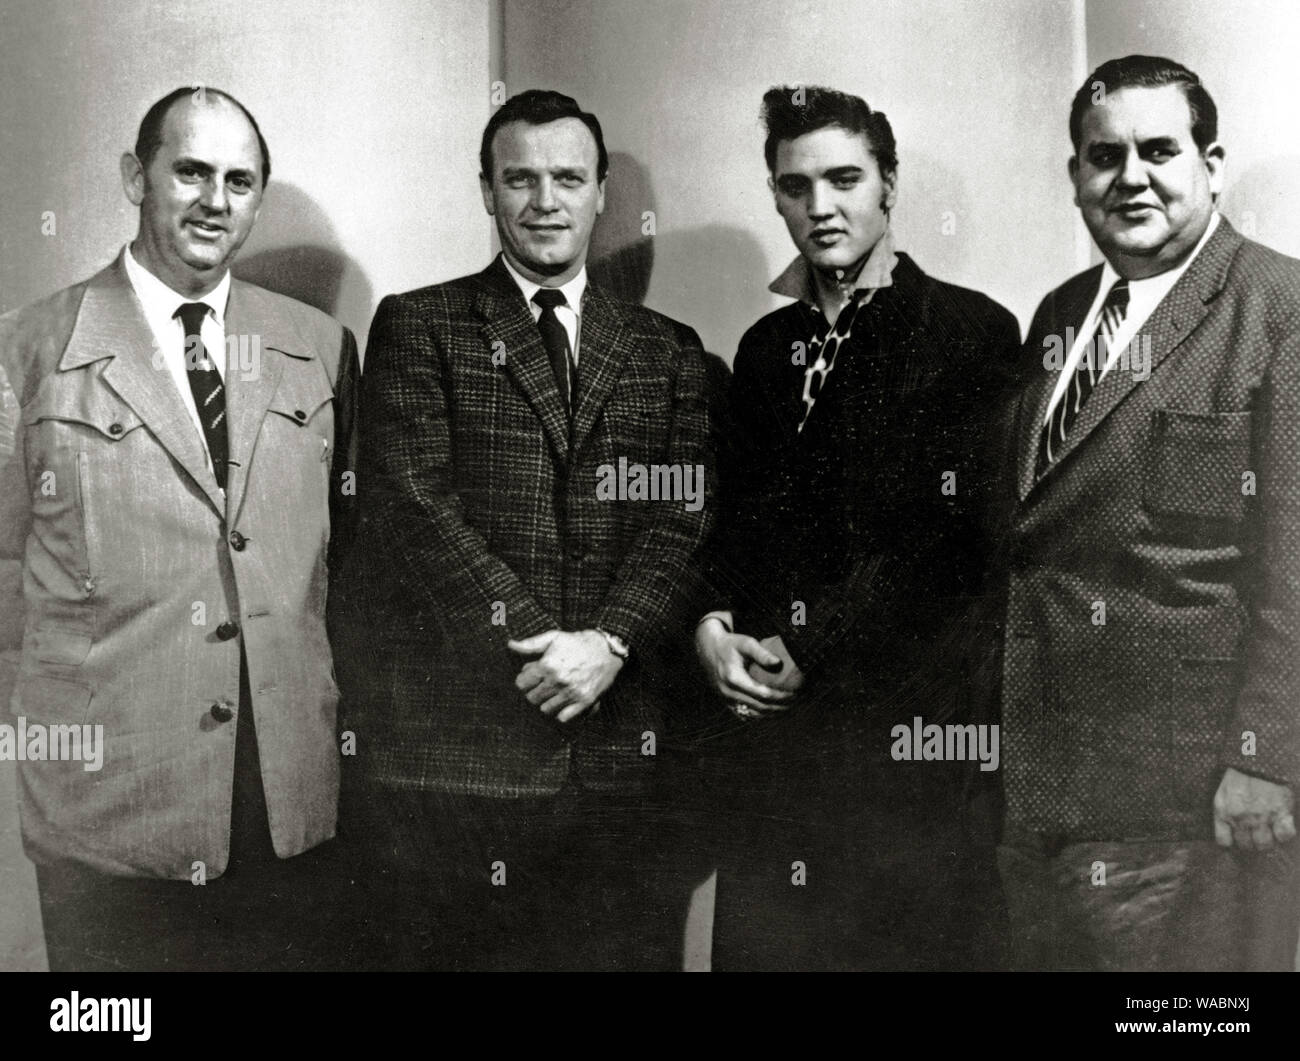 Elvis Presley with Colonel Tom Parker, Eddy Arnold and Steve Sholes at the RCA Recording studios for his last recording session before leaving for his 2 year tour of duty in the Army (March 10th 1958)  File Reference # 33848-526THA Stock Photo